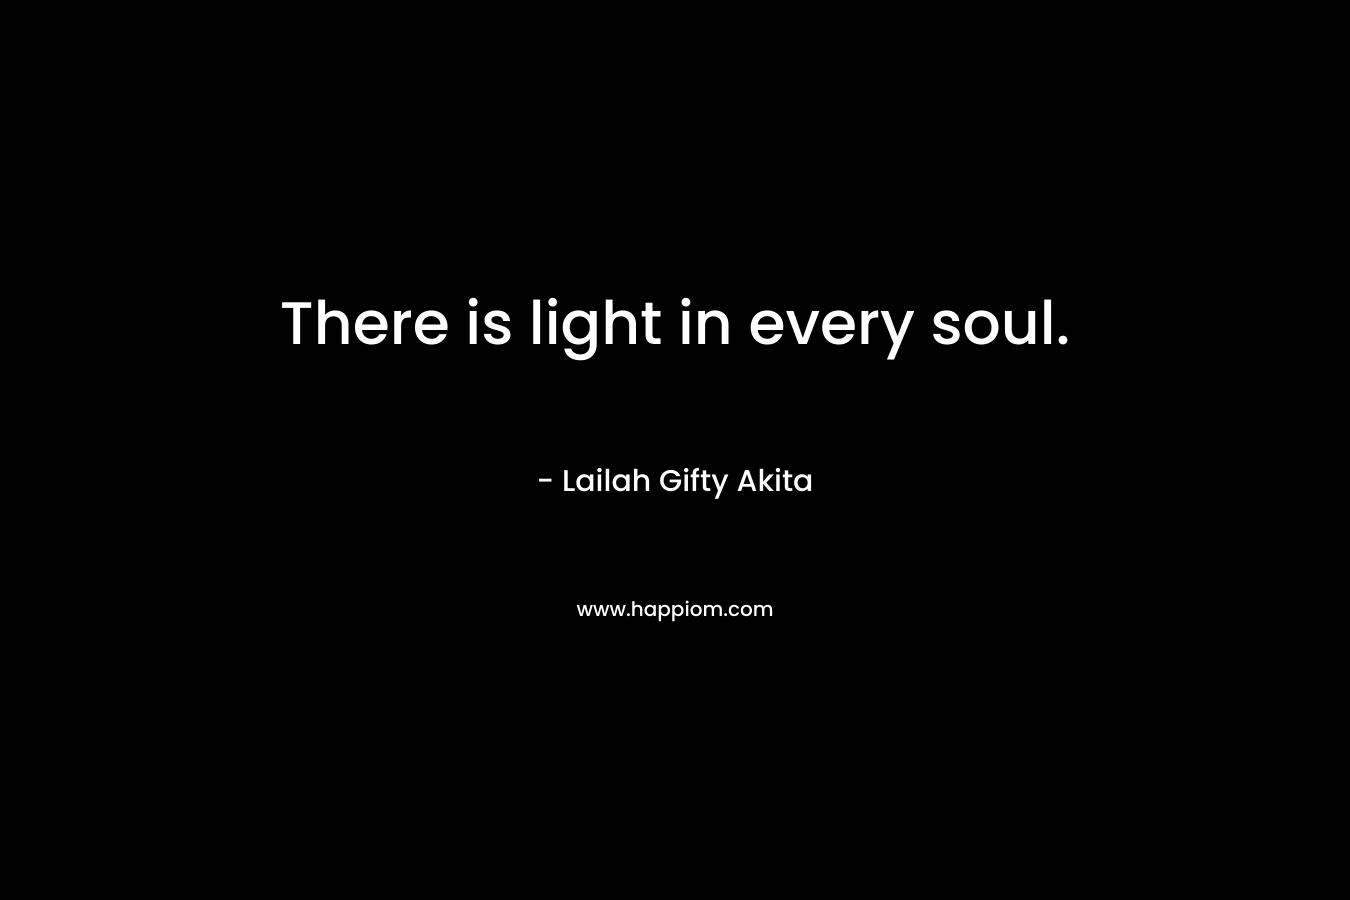 There is light in every soul.